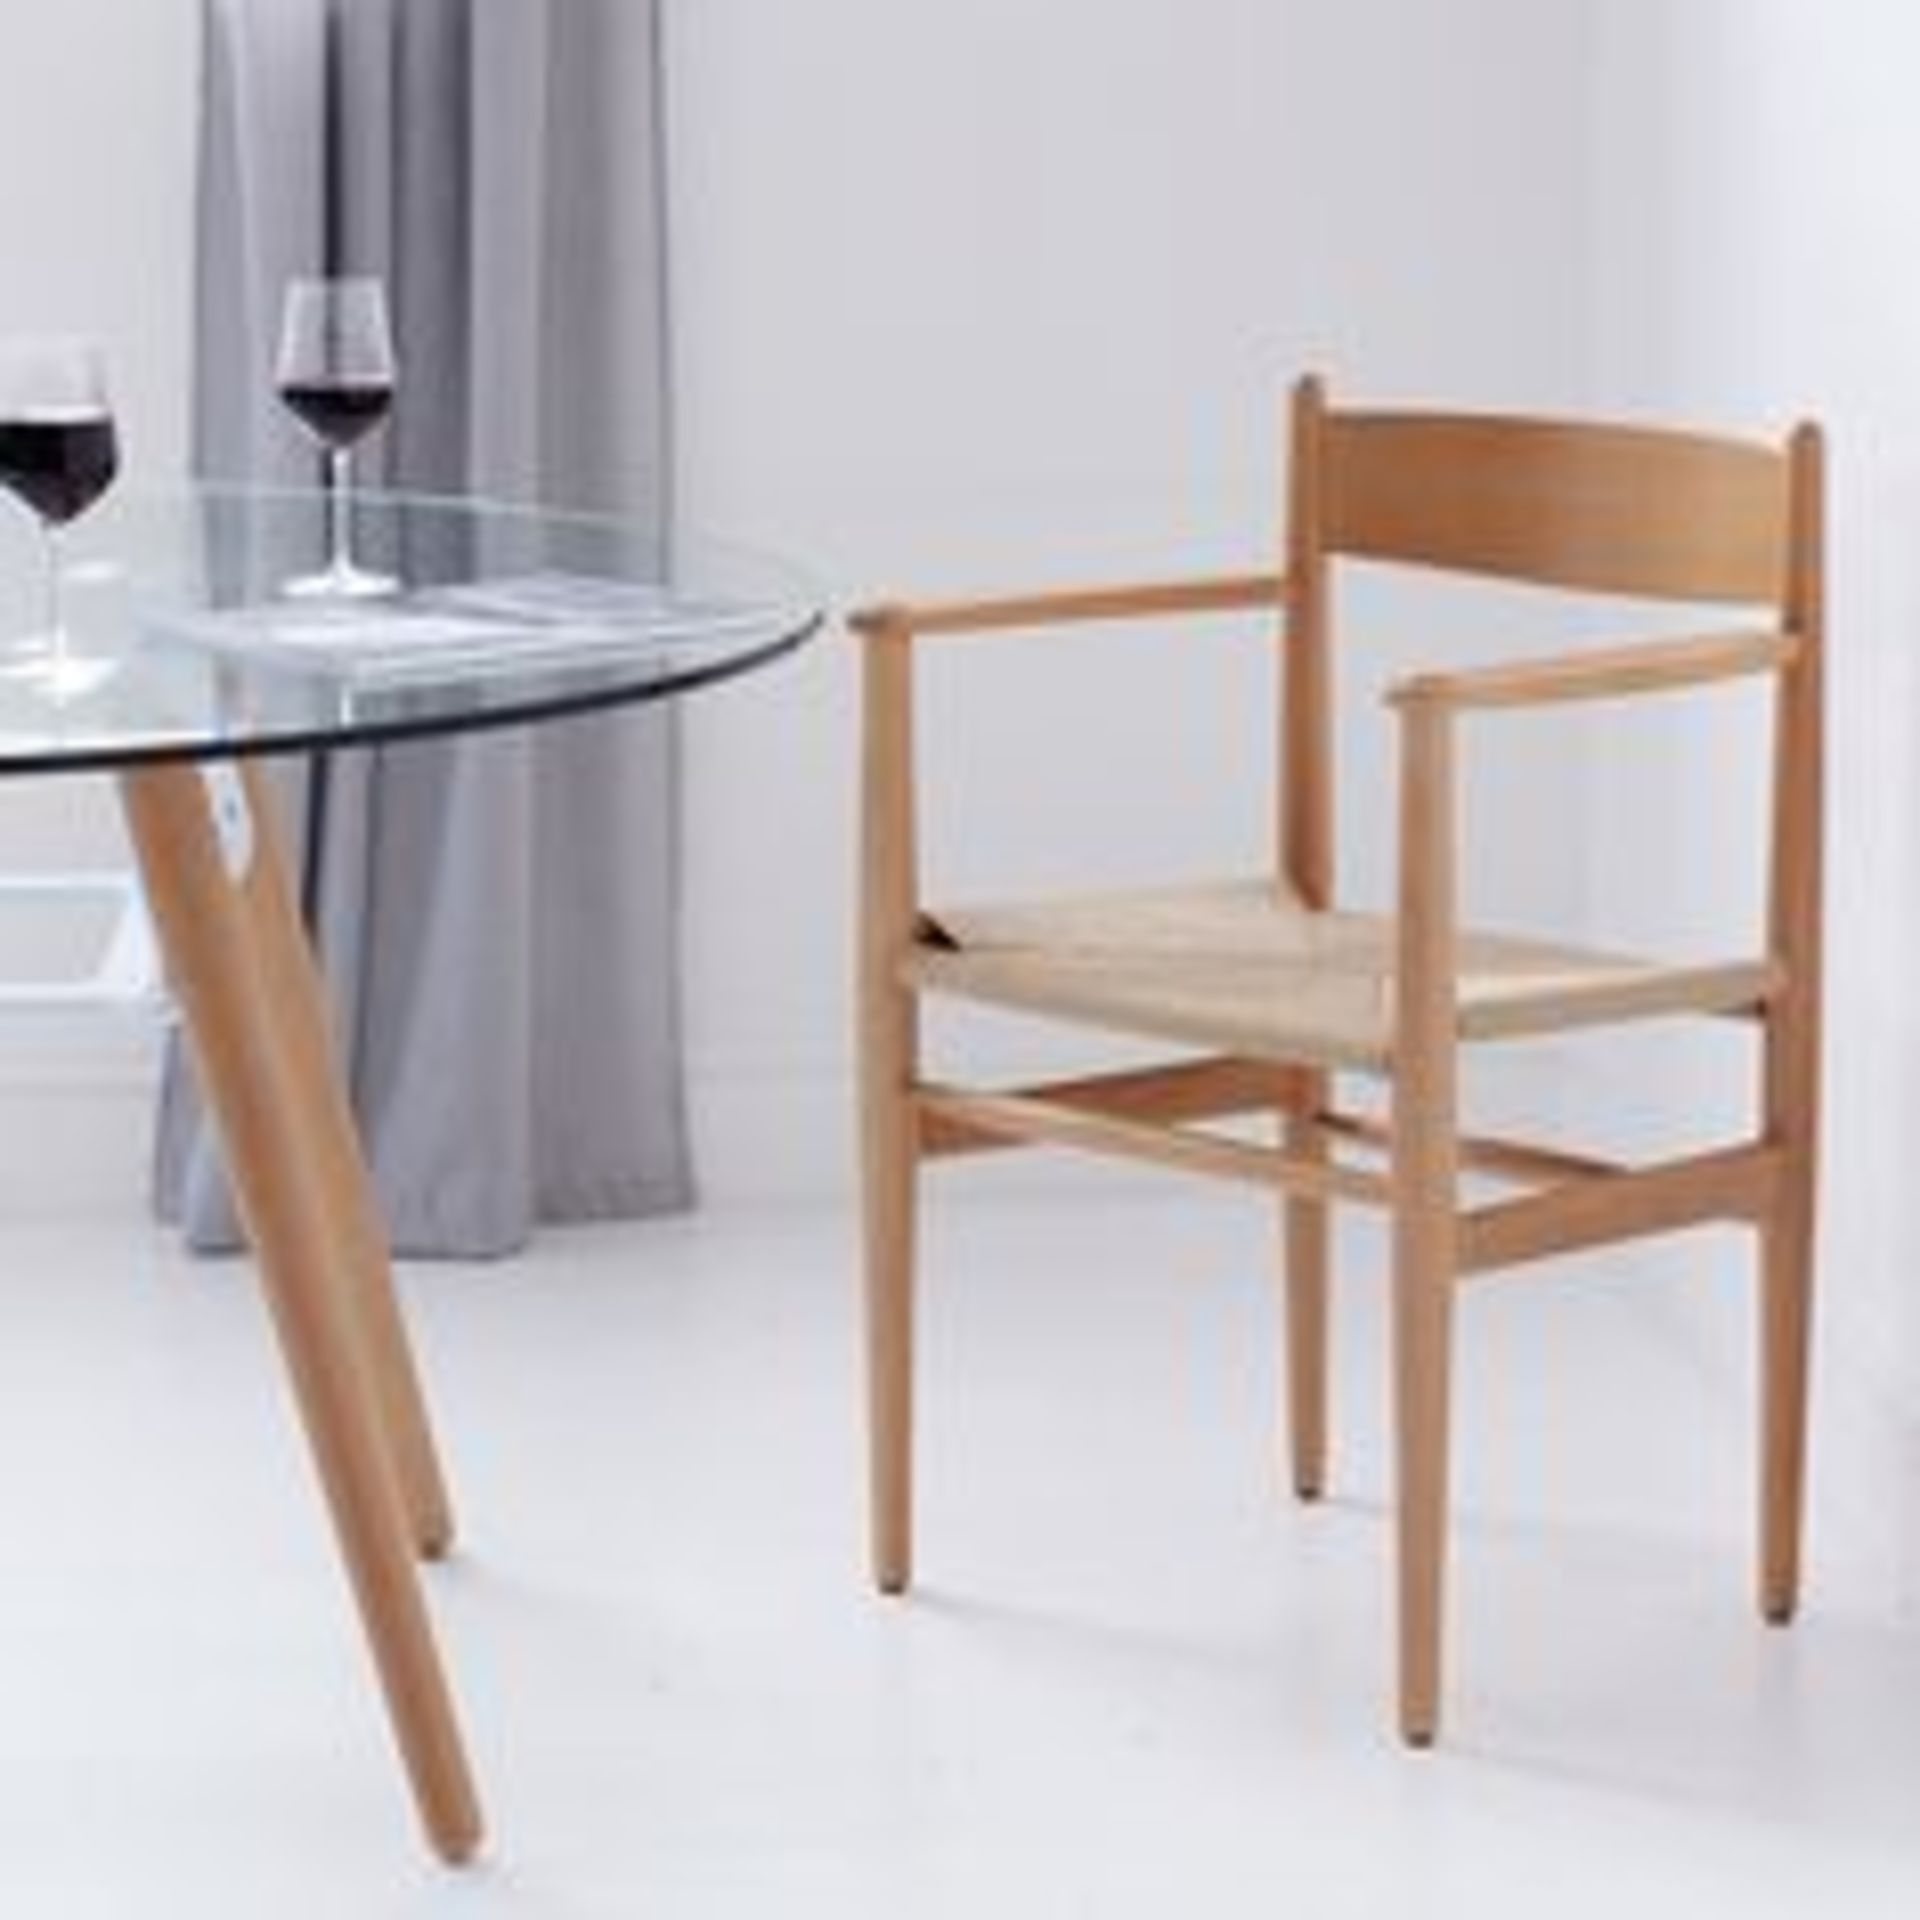 6 x NIELSEN Hans-J Wegner Inspired Shaker-style Dining Chairs With A Woven Rattan Seat In A Light - Image 2 of 2